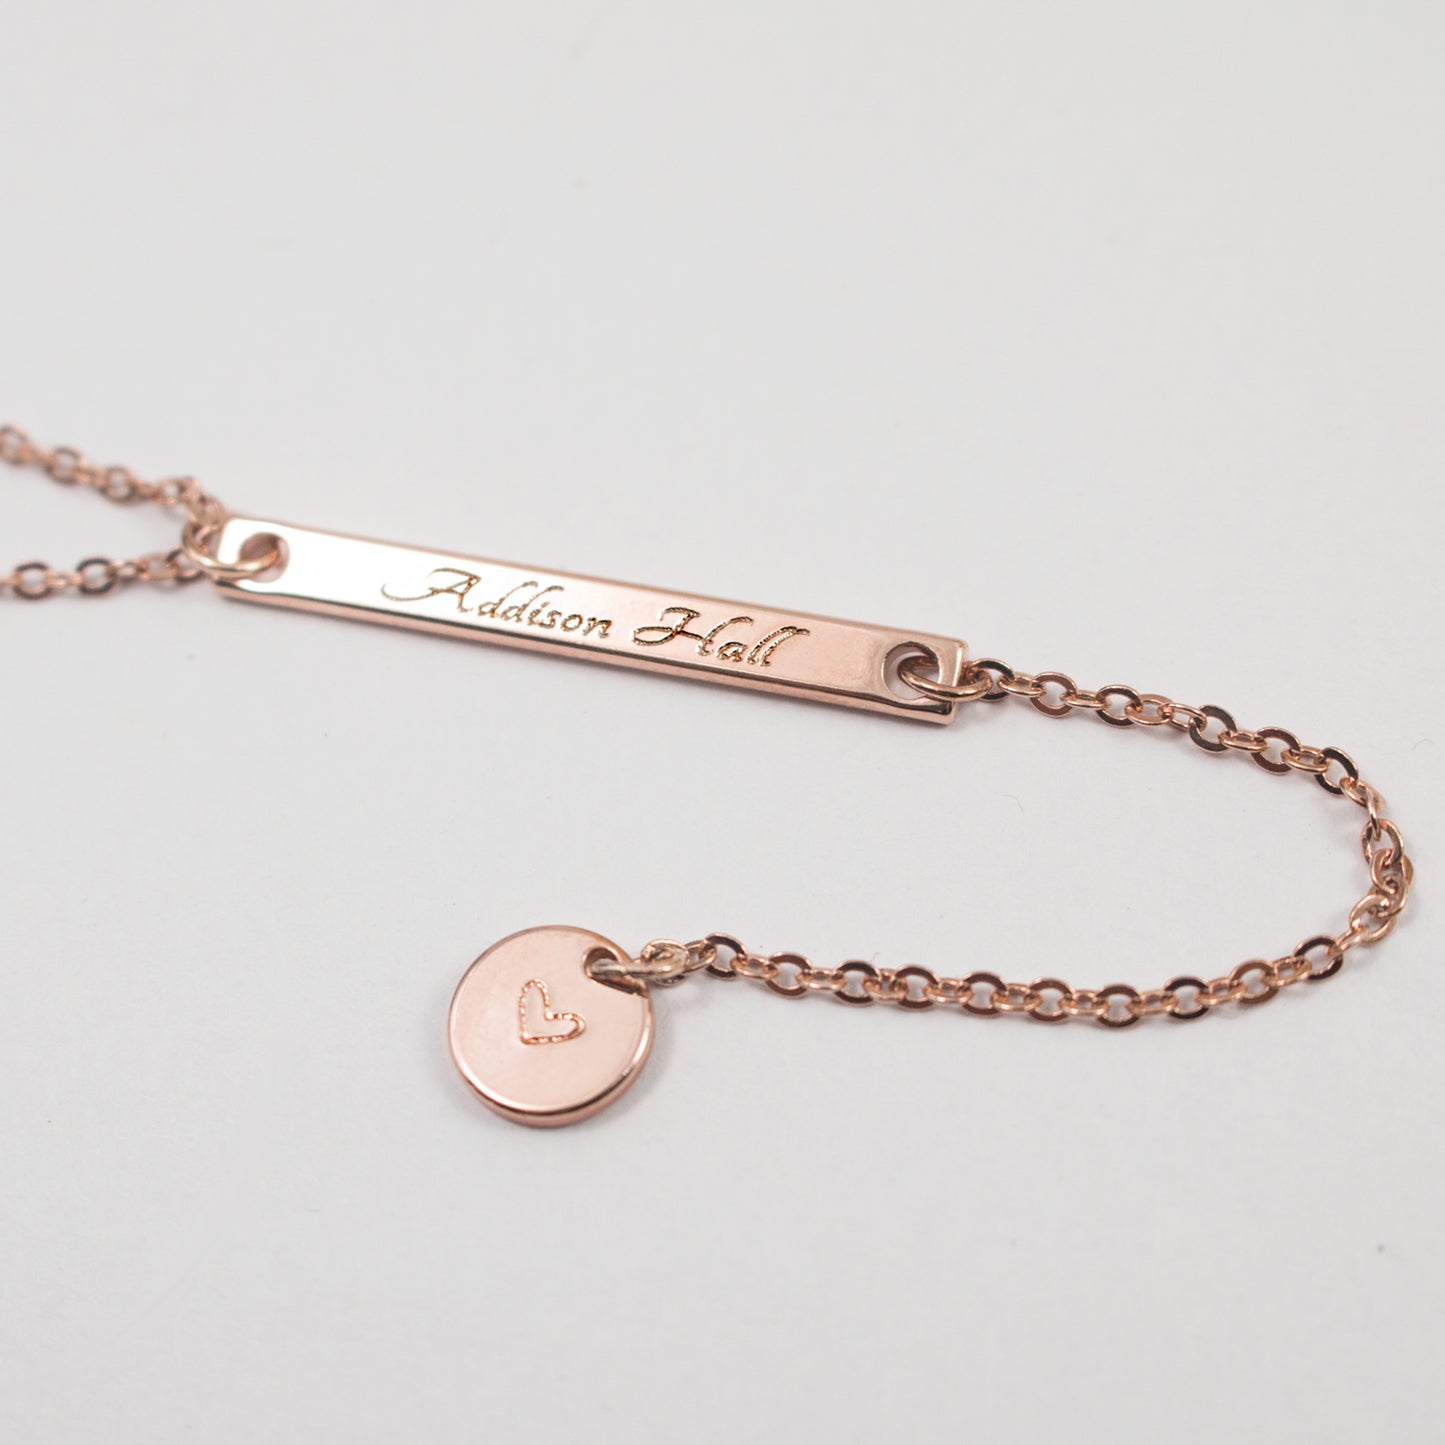 Name bar and disc long Necklace - Dainty long Necklace  Personalized